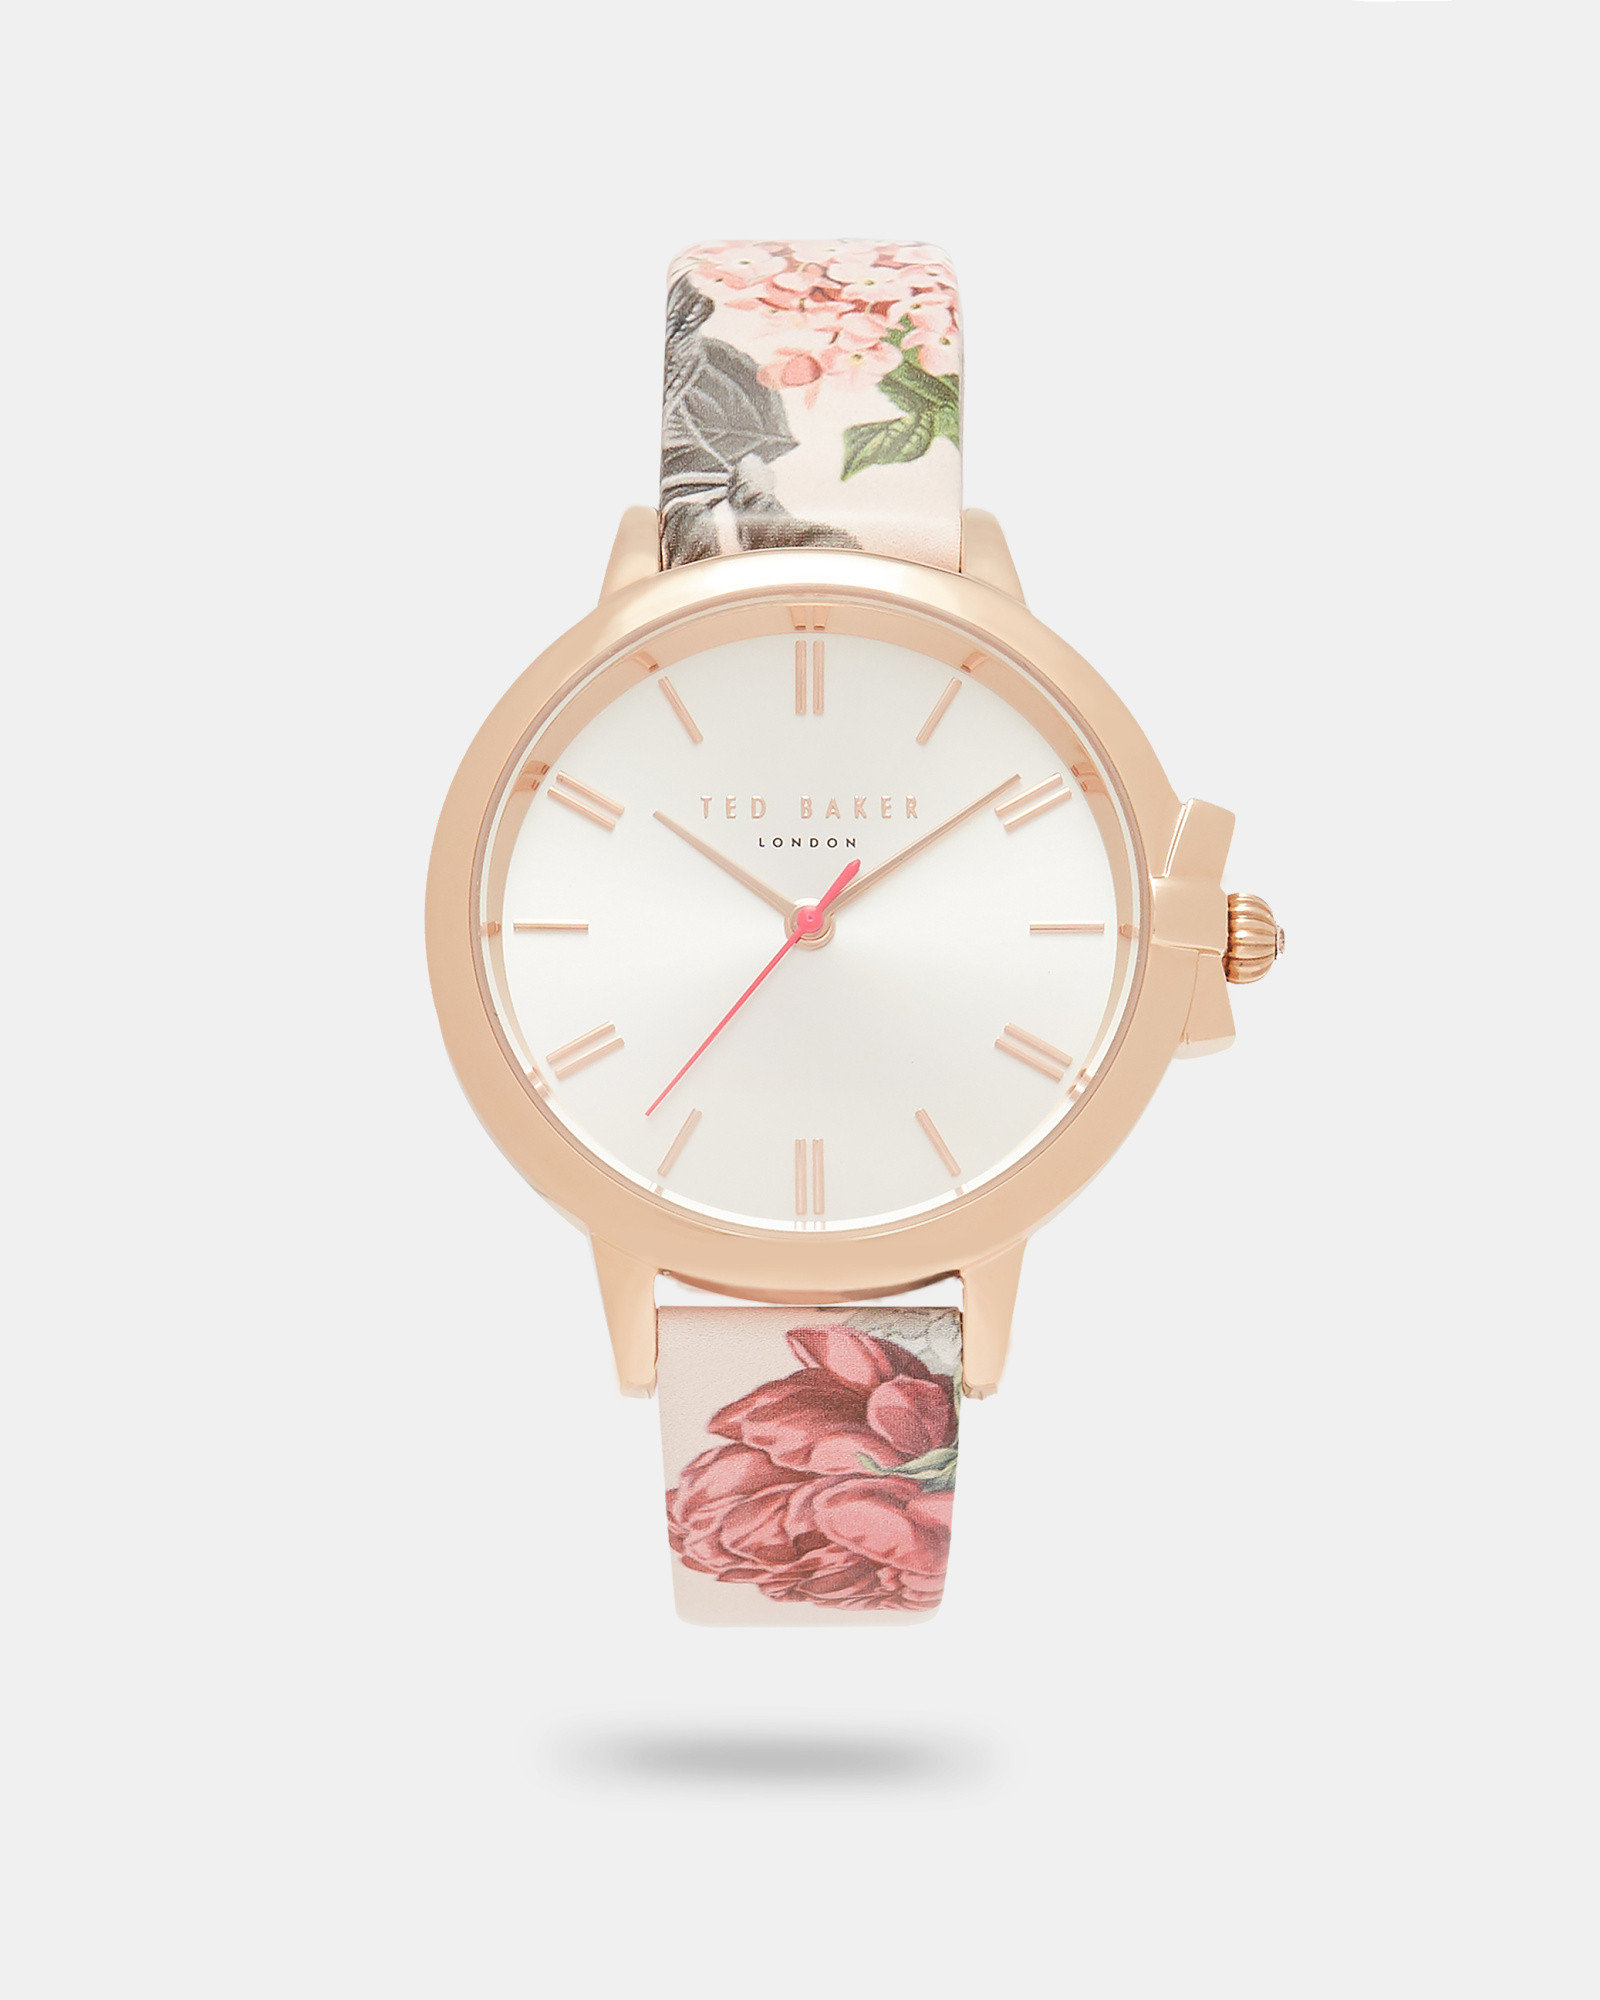 ROOTH Palace Gardens leather strap watch